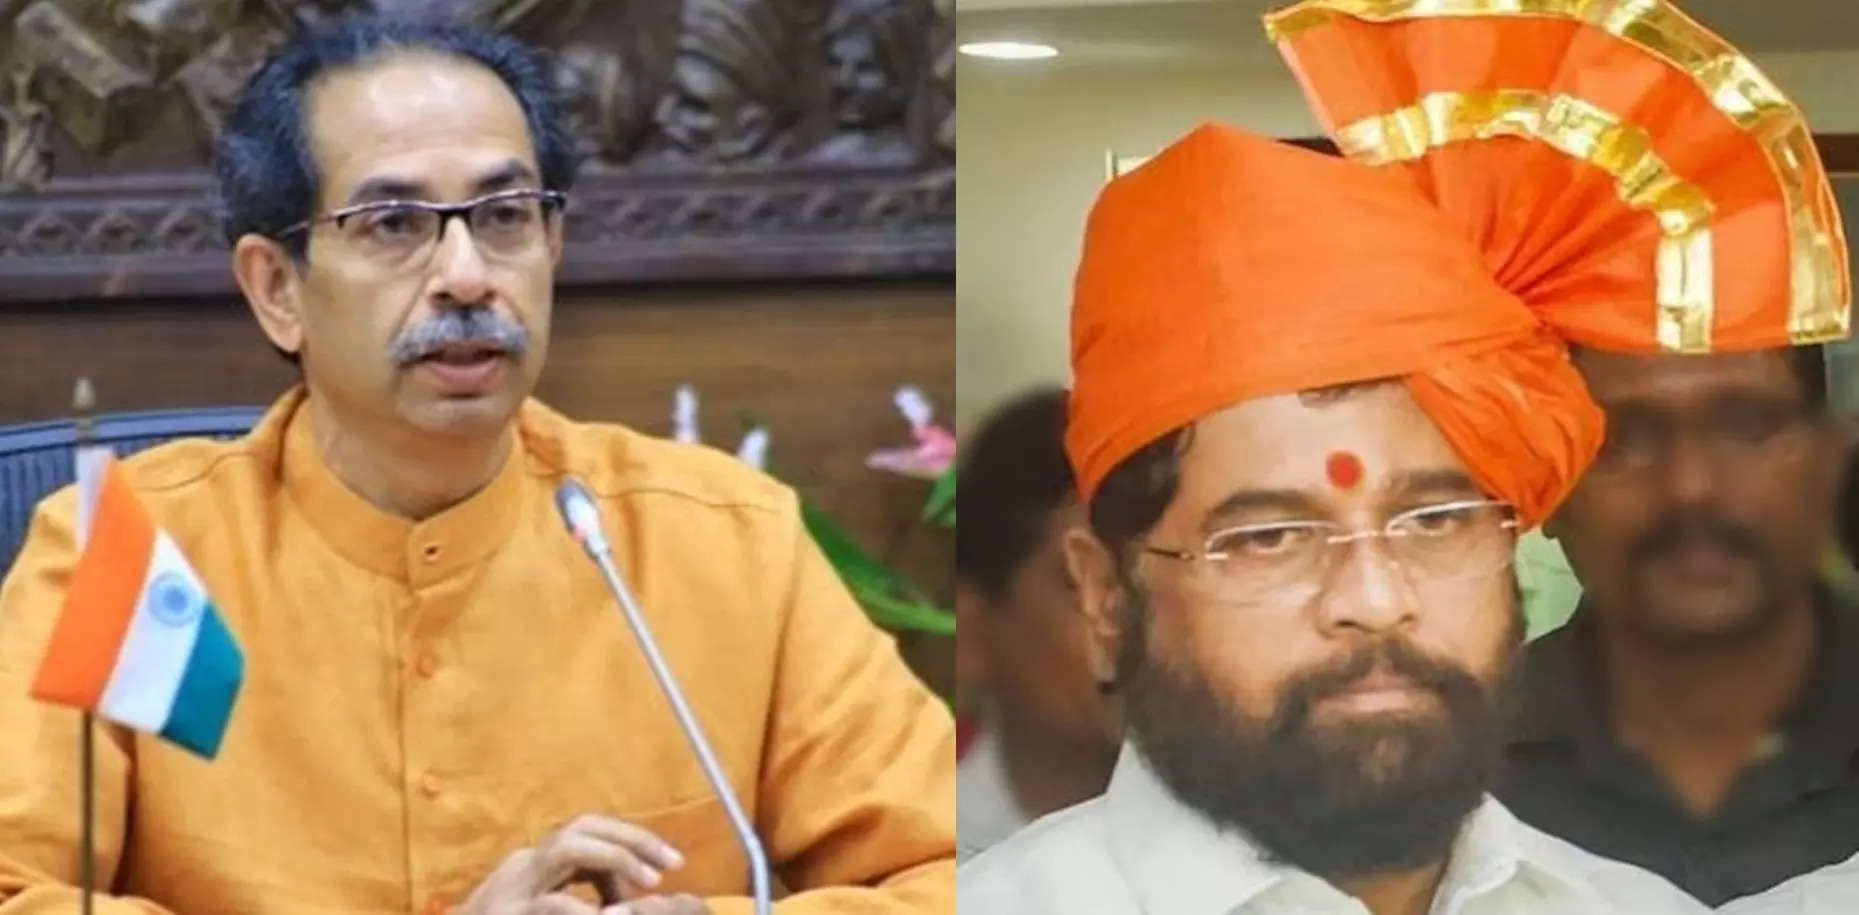 Uddhav and Shinde Senas to flex muscles in legacy inheritance fight with Dussehra rallies in Mumbai on Tuesday – Times of India